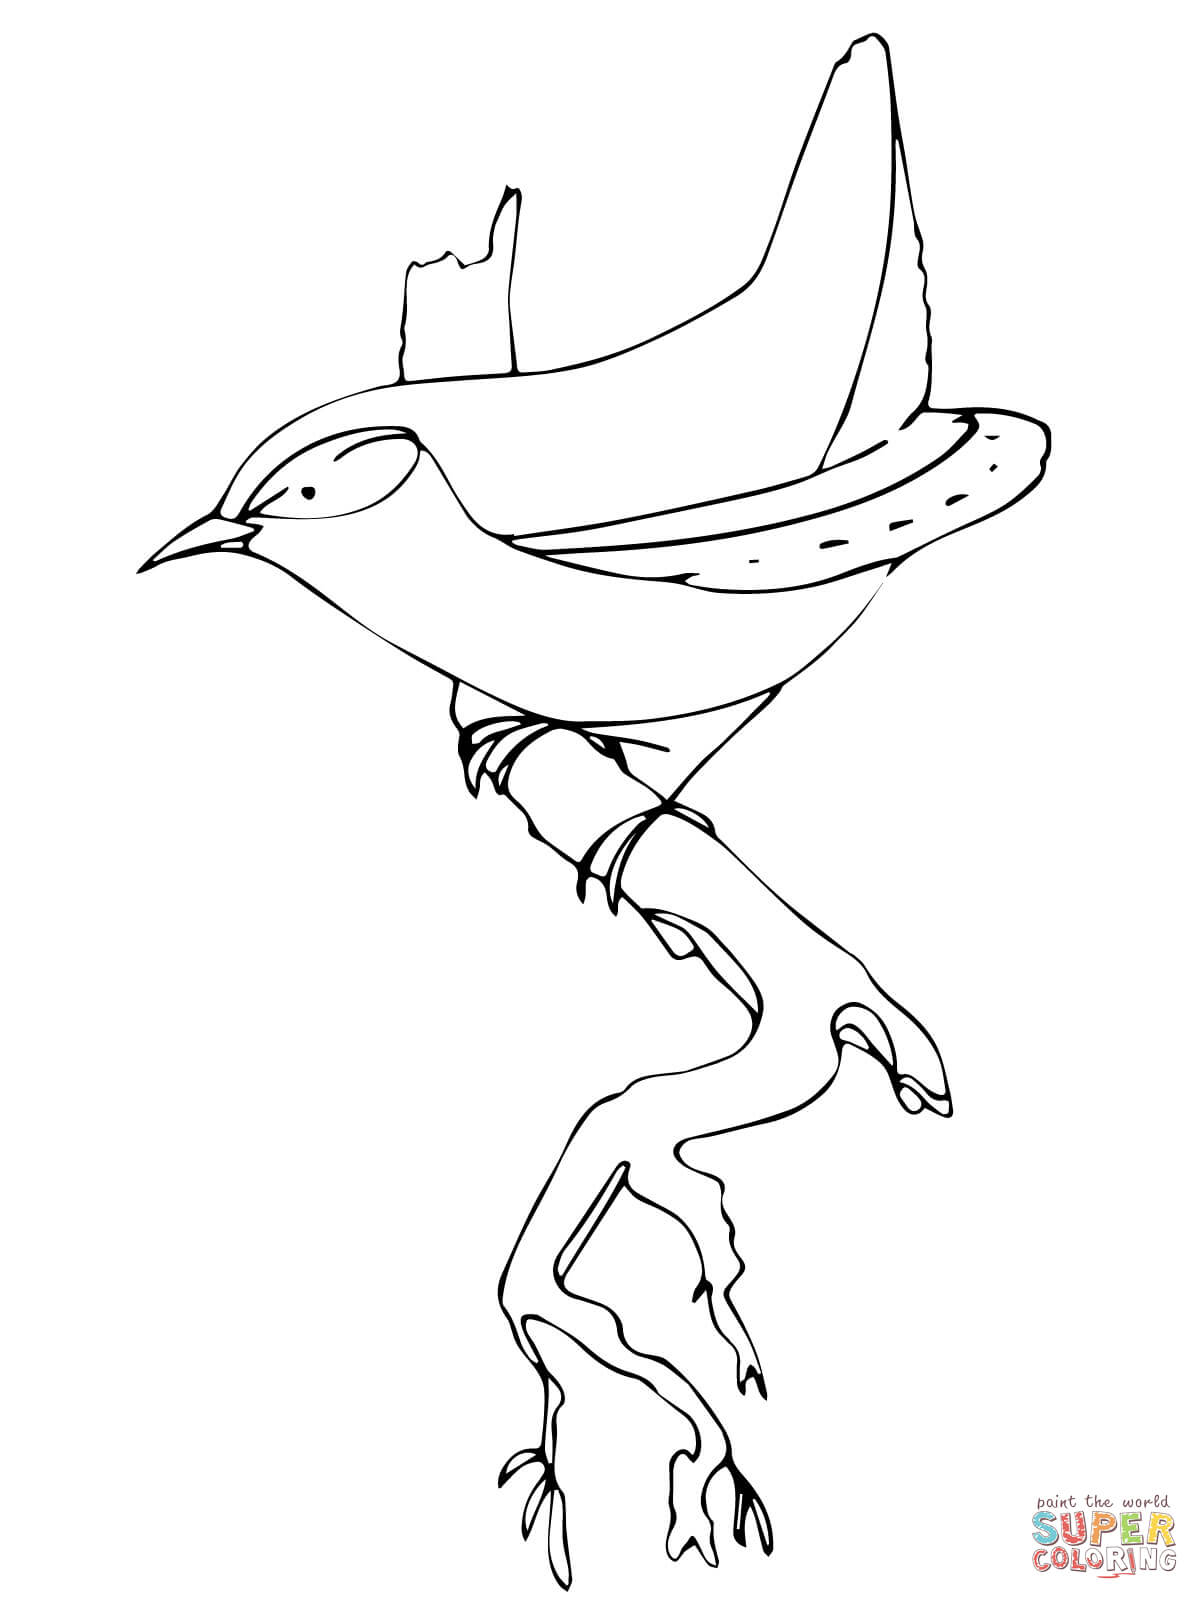 Carolina Wren Coloring Page Wren Bird Coloring Page Free Printable Coloring Pages